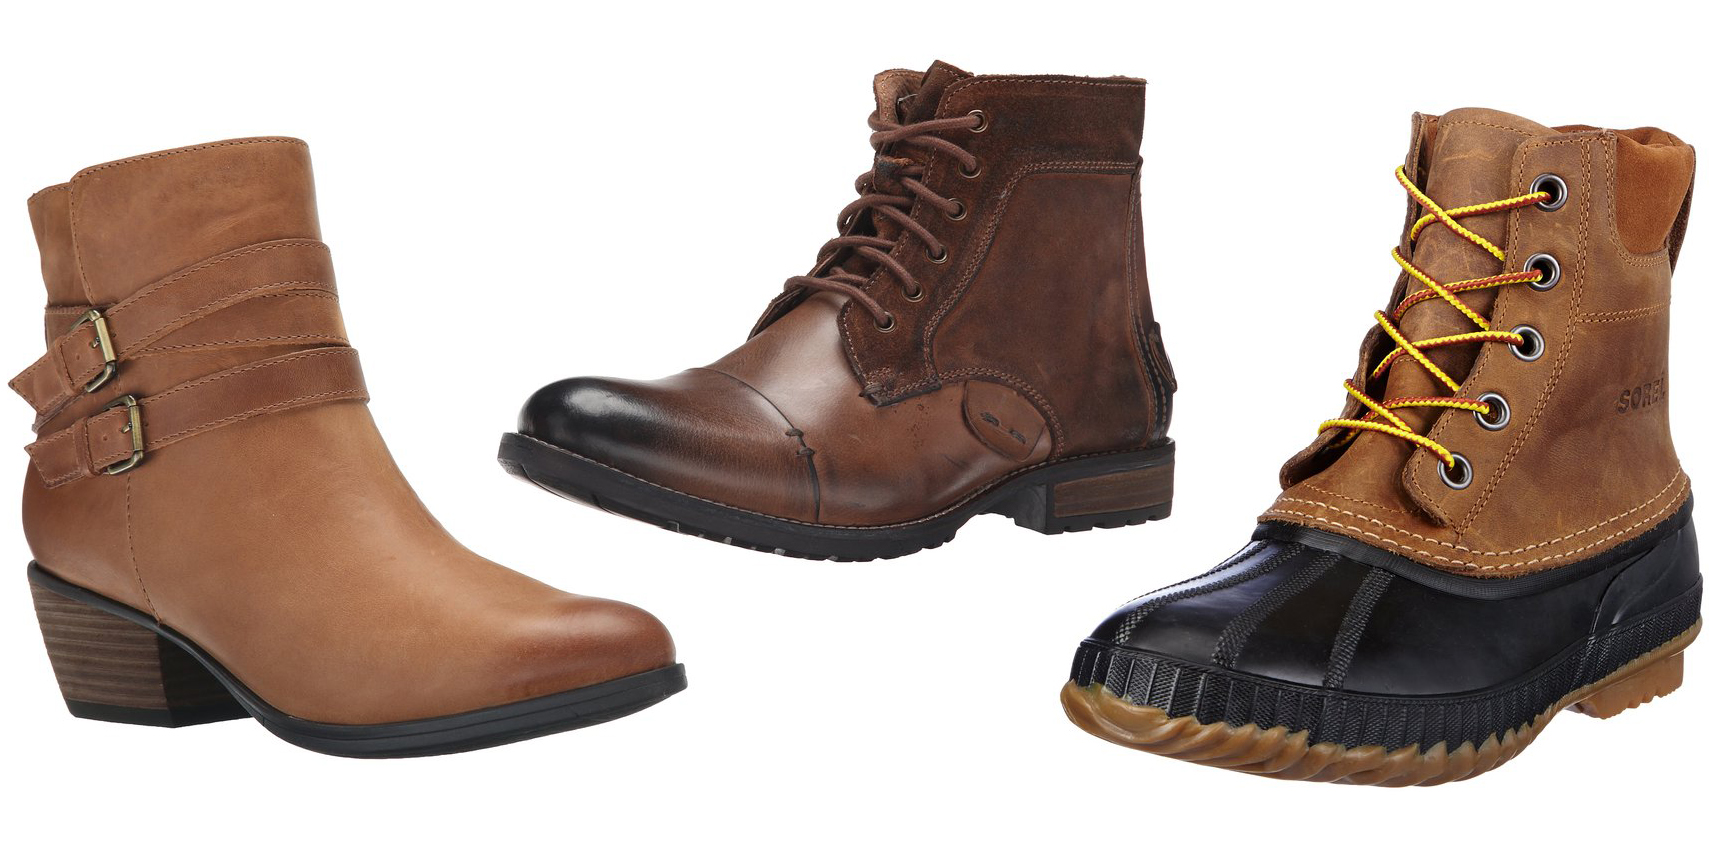 Fashion: 20% off boots at Amazon - Aldo, Steve Madden, others plus ...